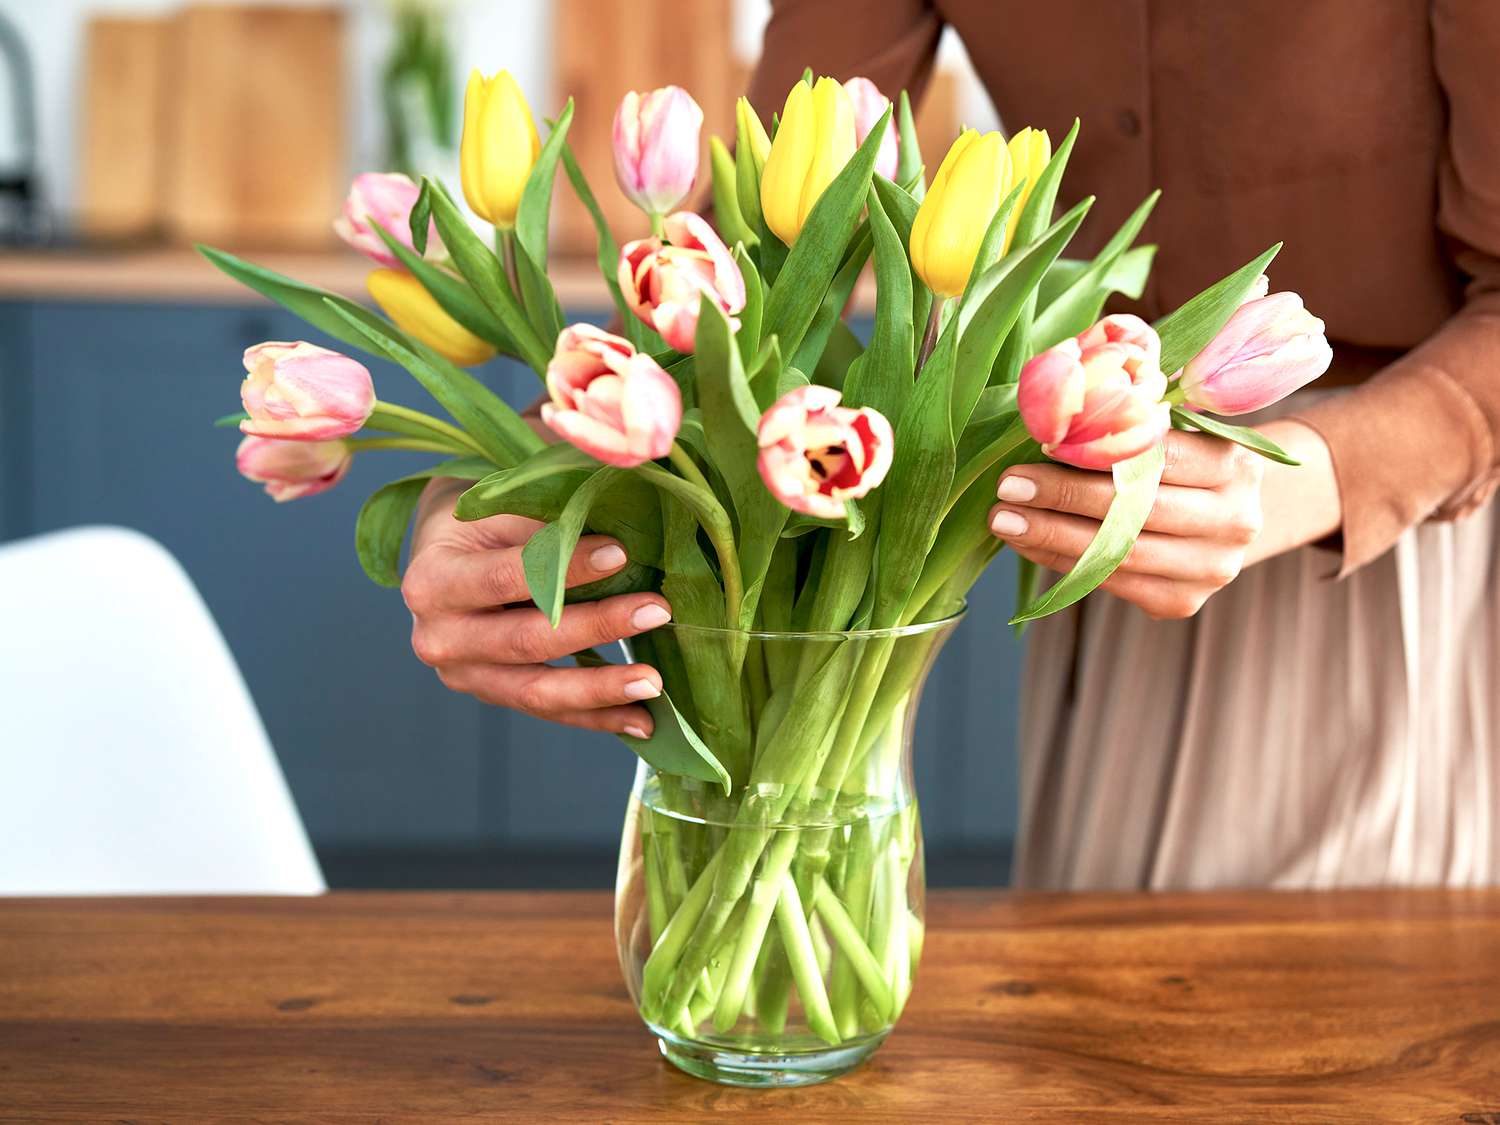 How To Store Flowers Before Giving Them